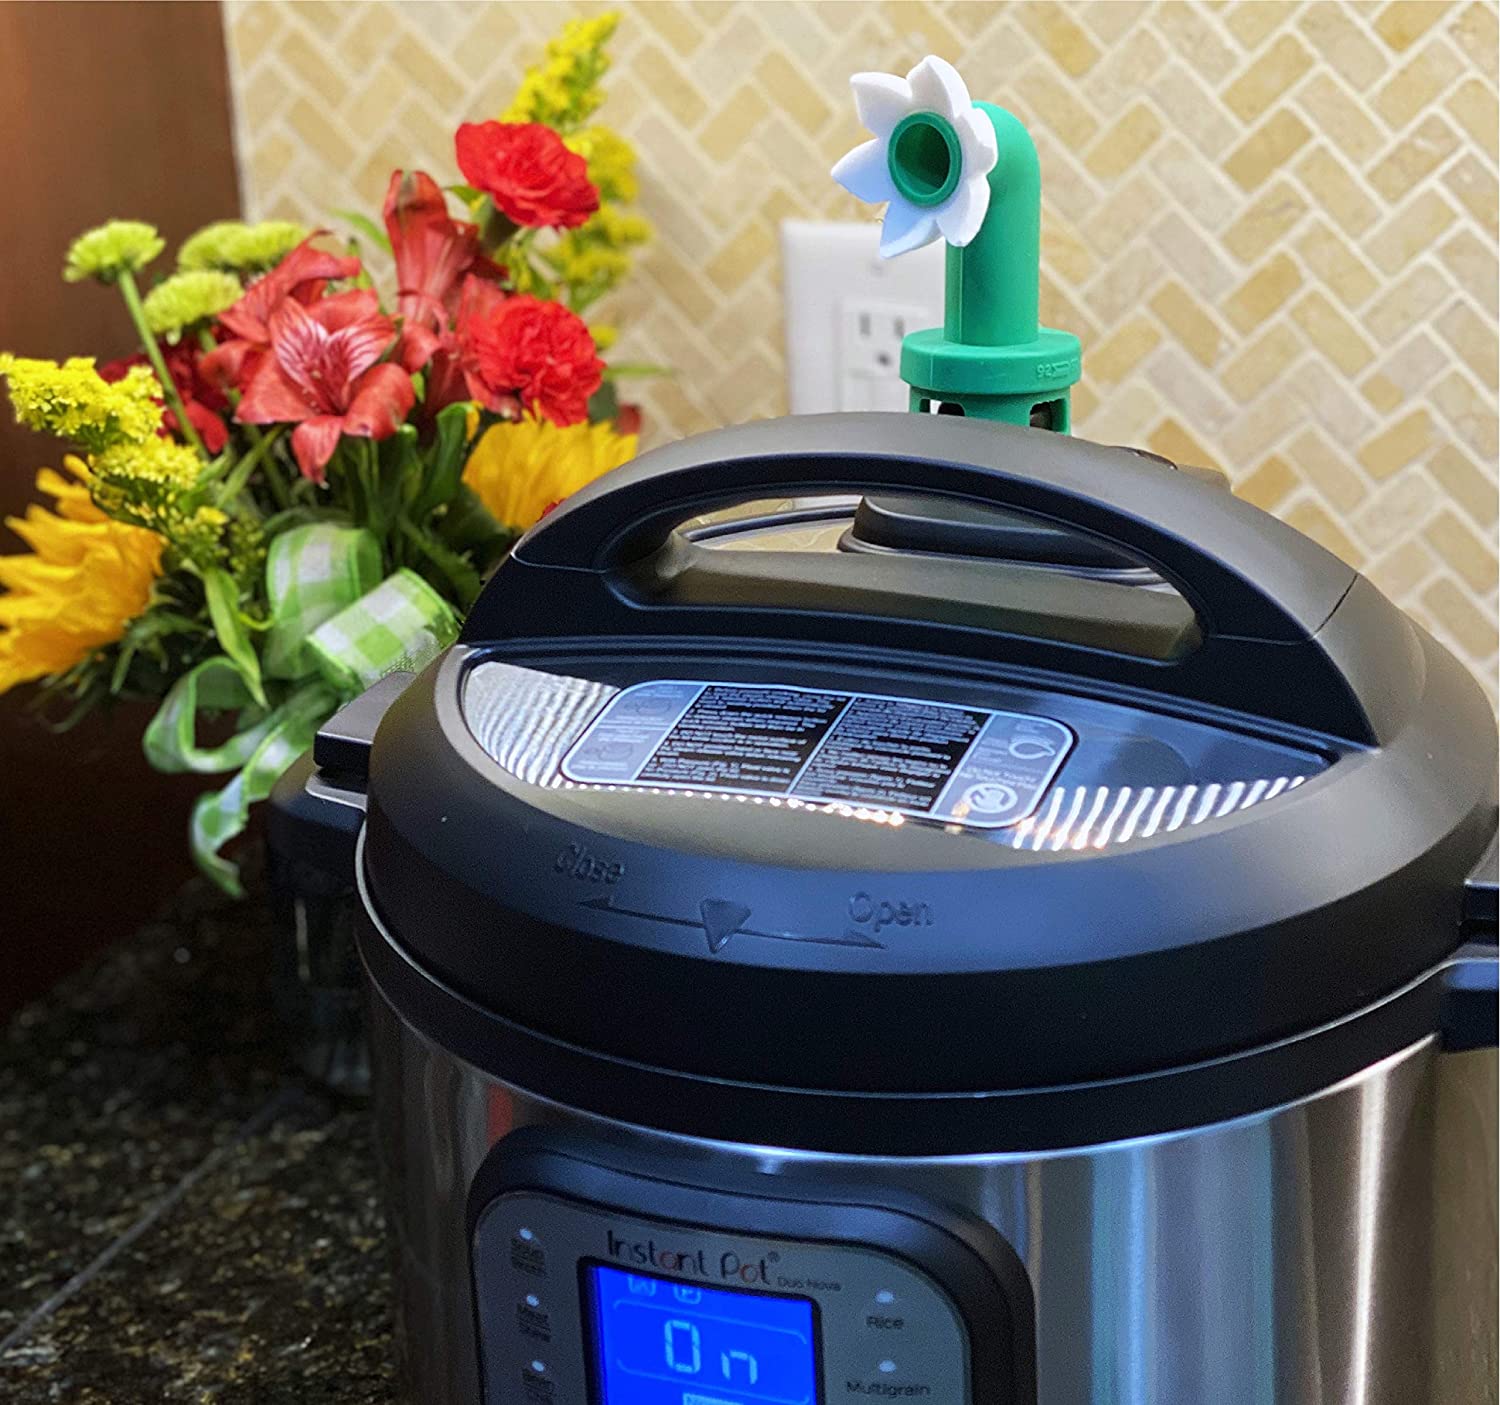 These Are the 5 Most Important Instant Pot Accessories, According